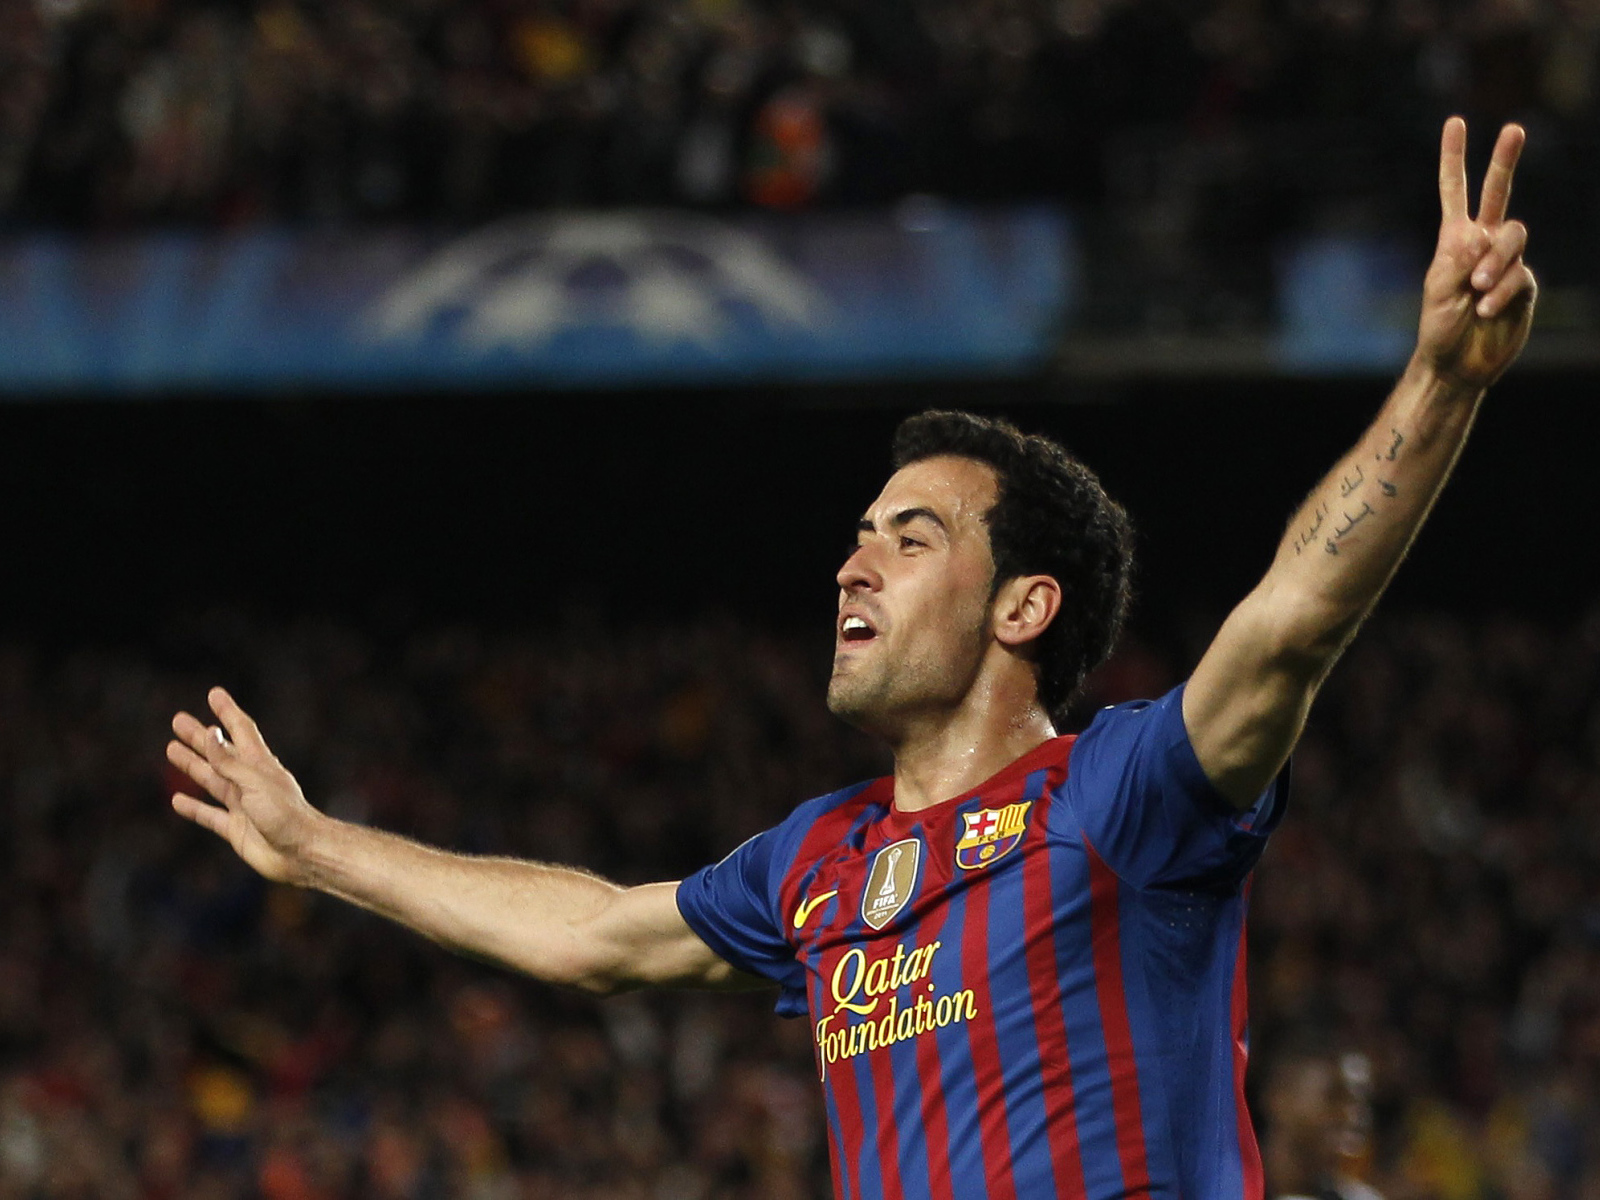 The halfback of Barcelona Sergio Busquets won the game